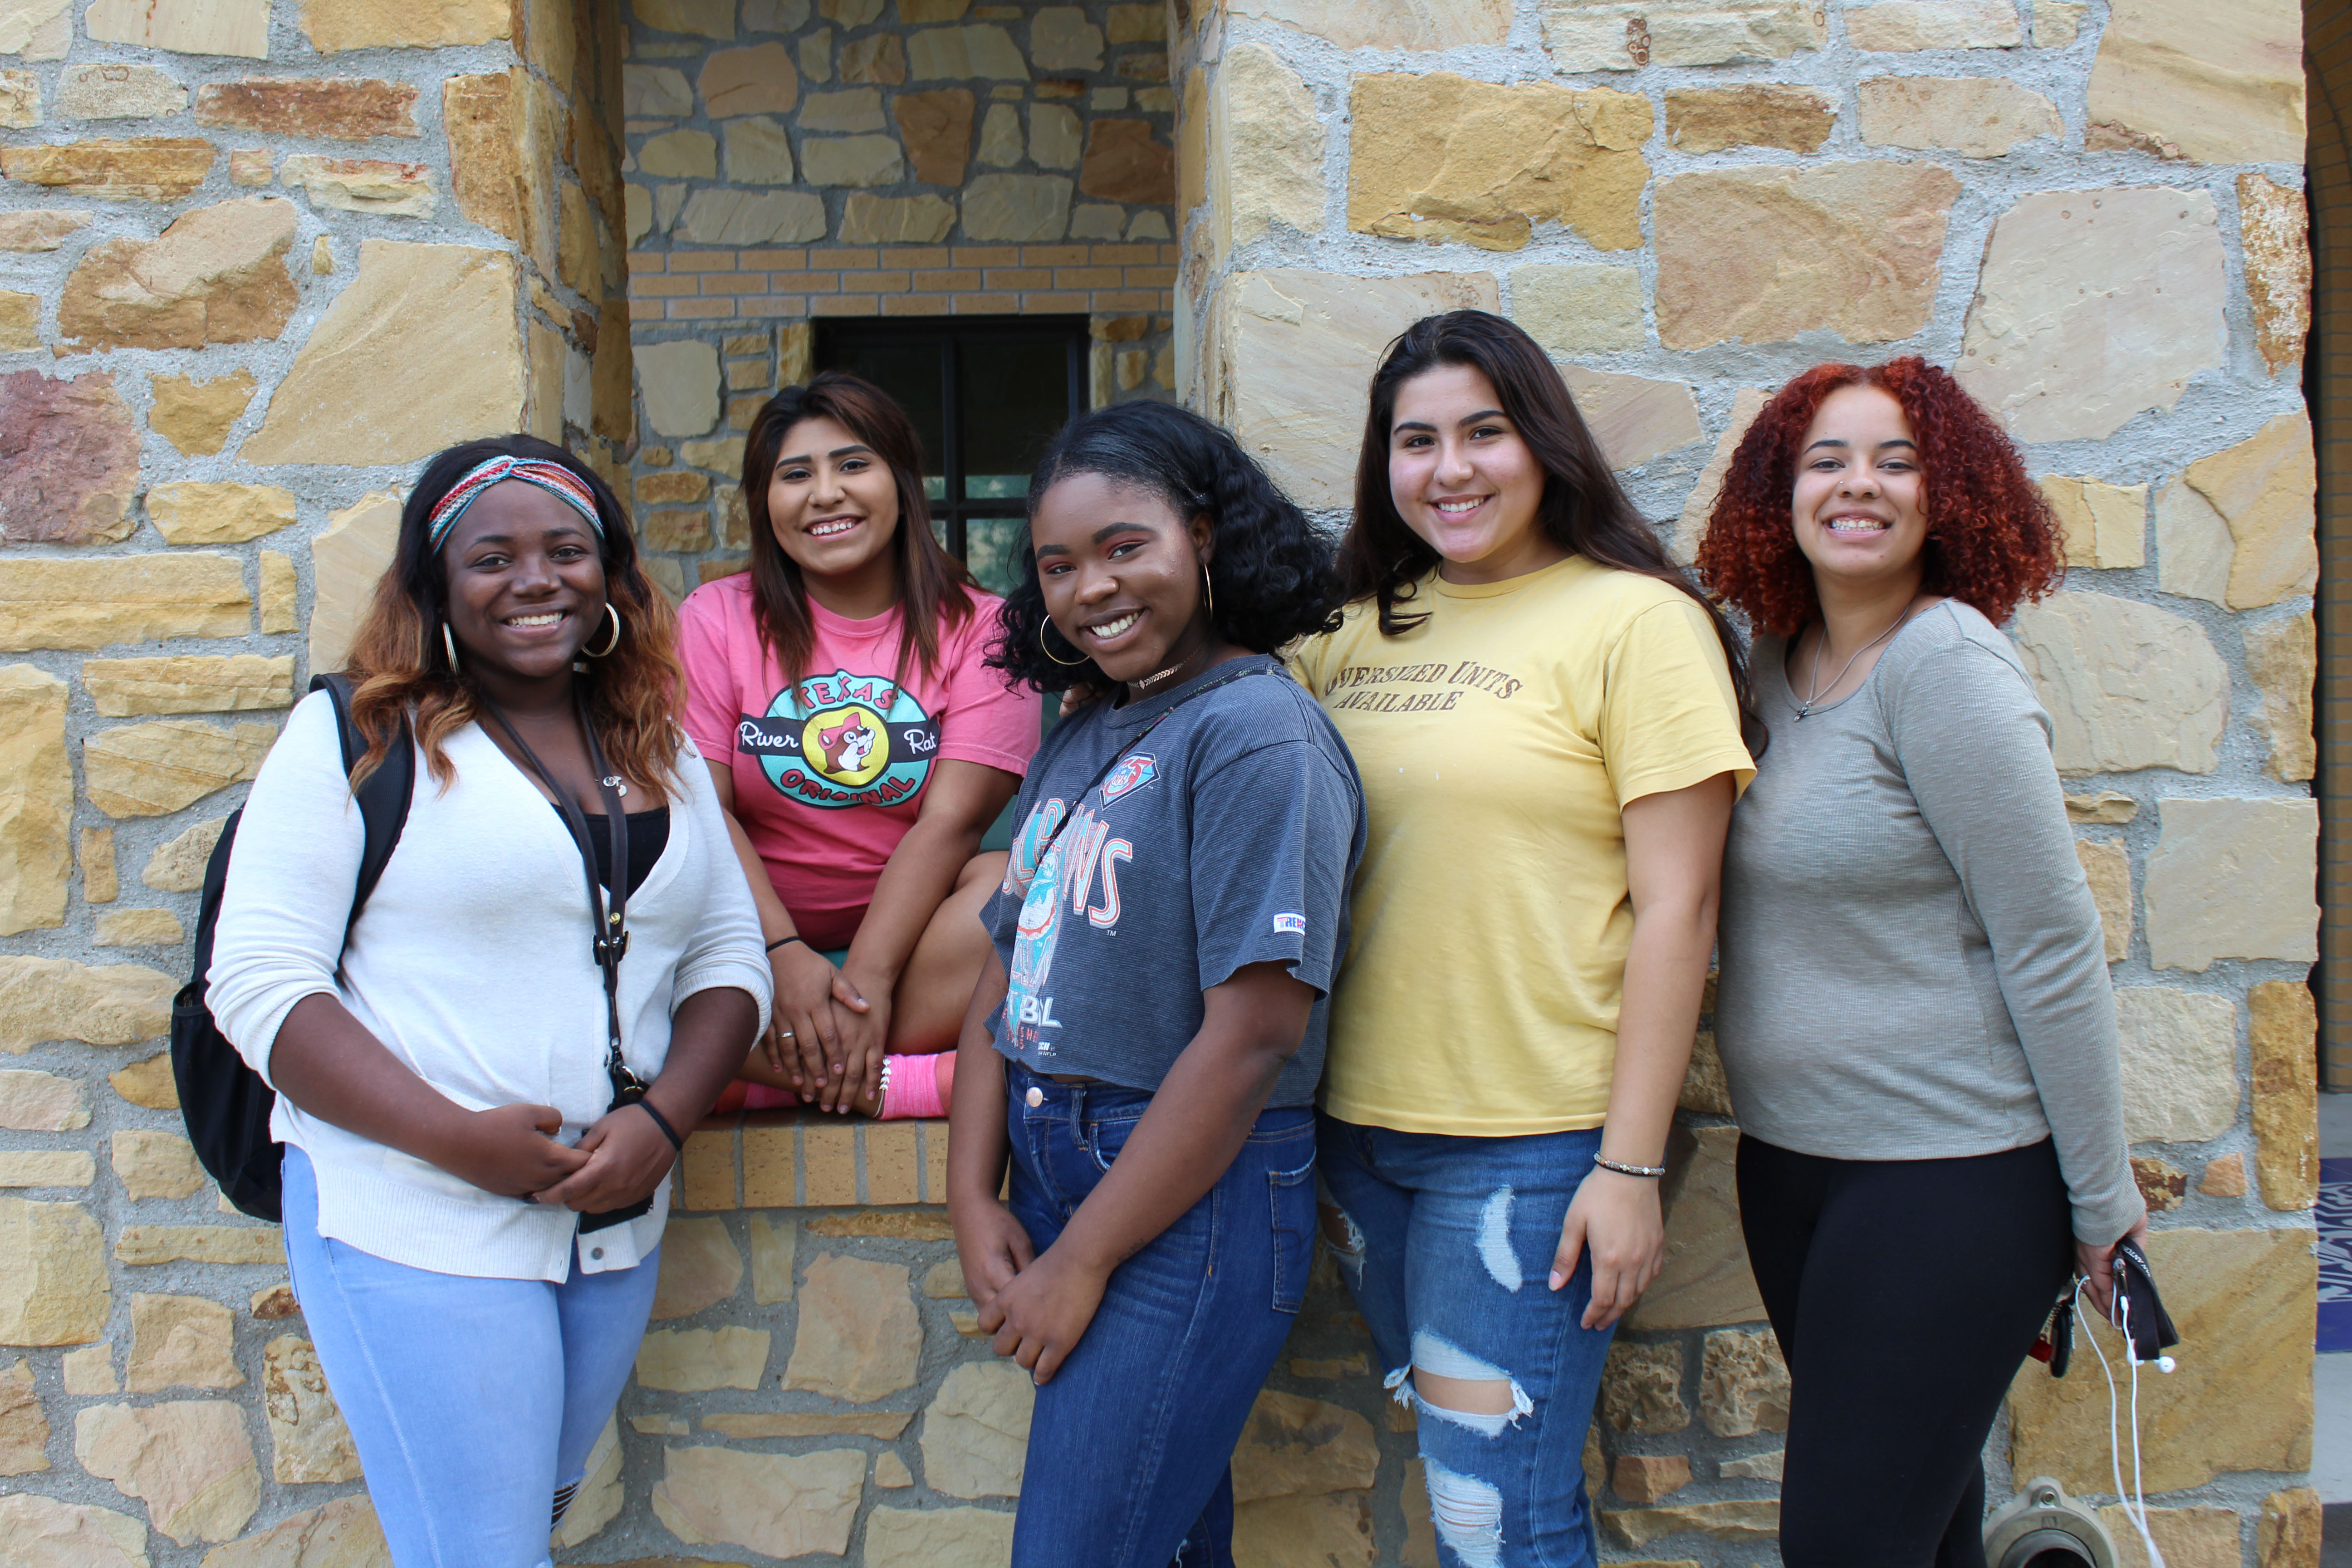 Alexis Harrison, Celeste Luna, Autumn Everett, Nicole Espinoza and Azia Franklin formed the Resident Hall Association to advocate for students living in the dorms. Photo by Sofia Medina